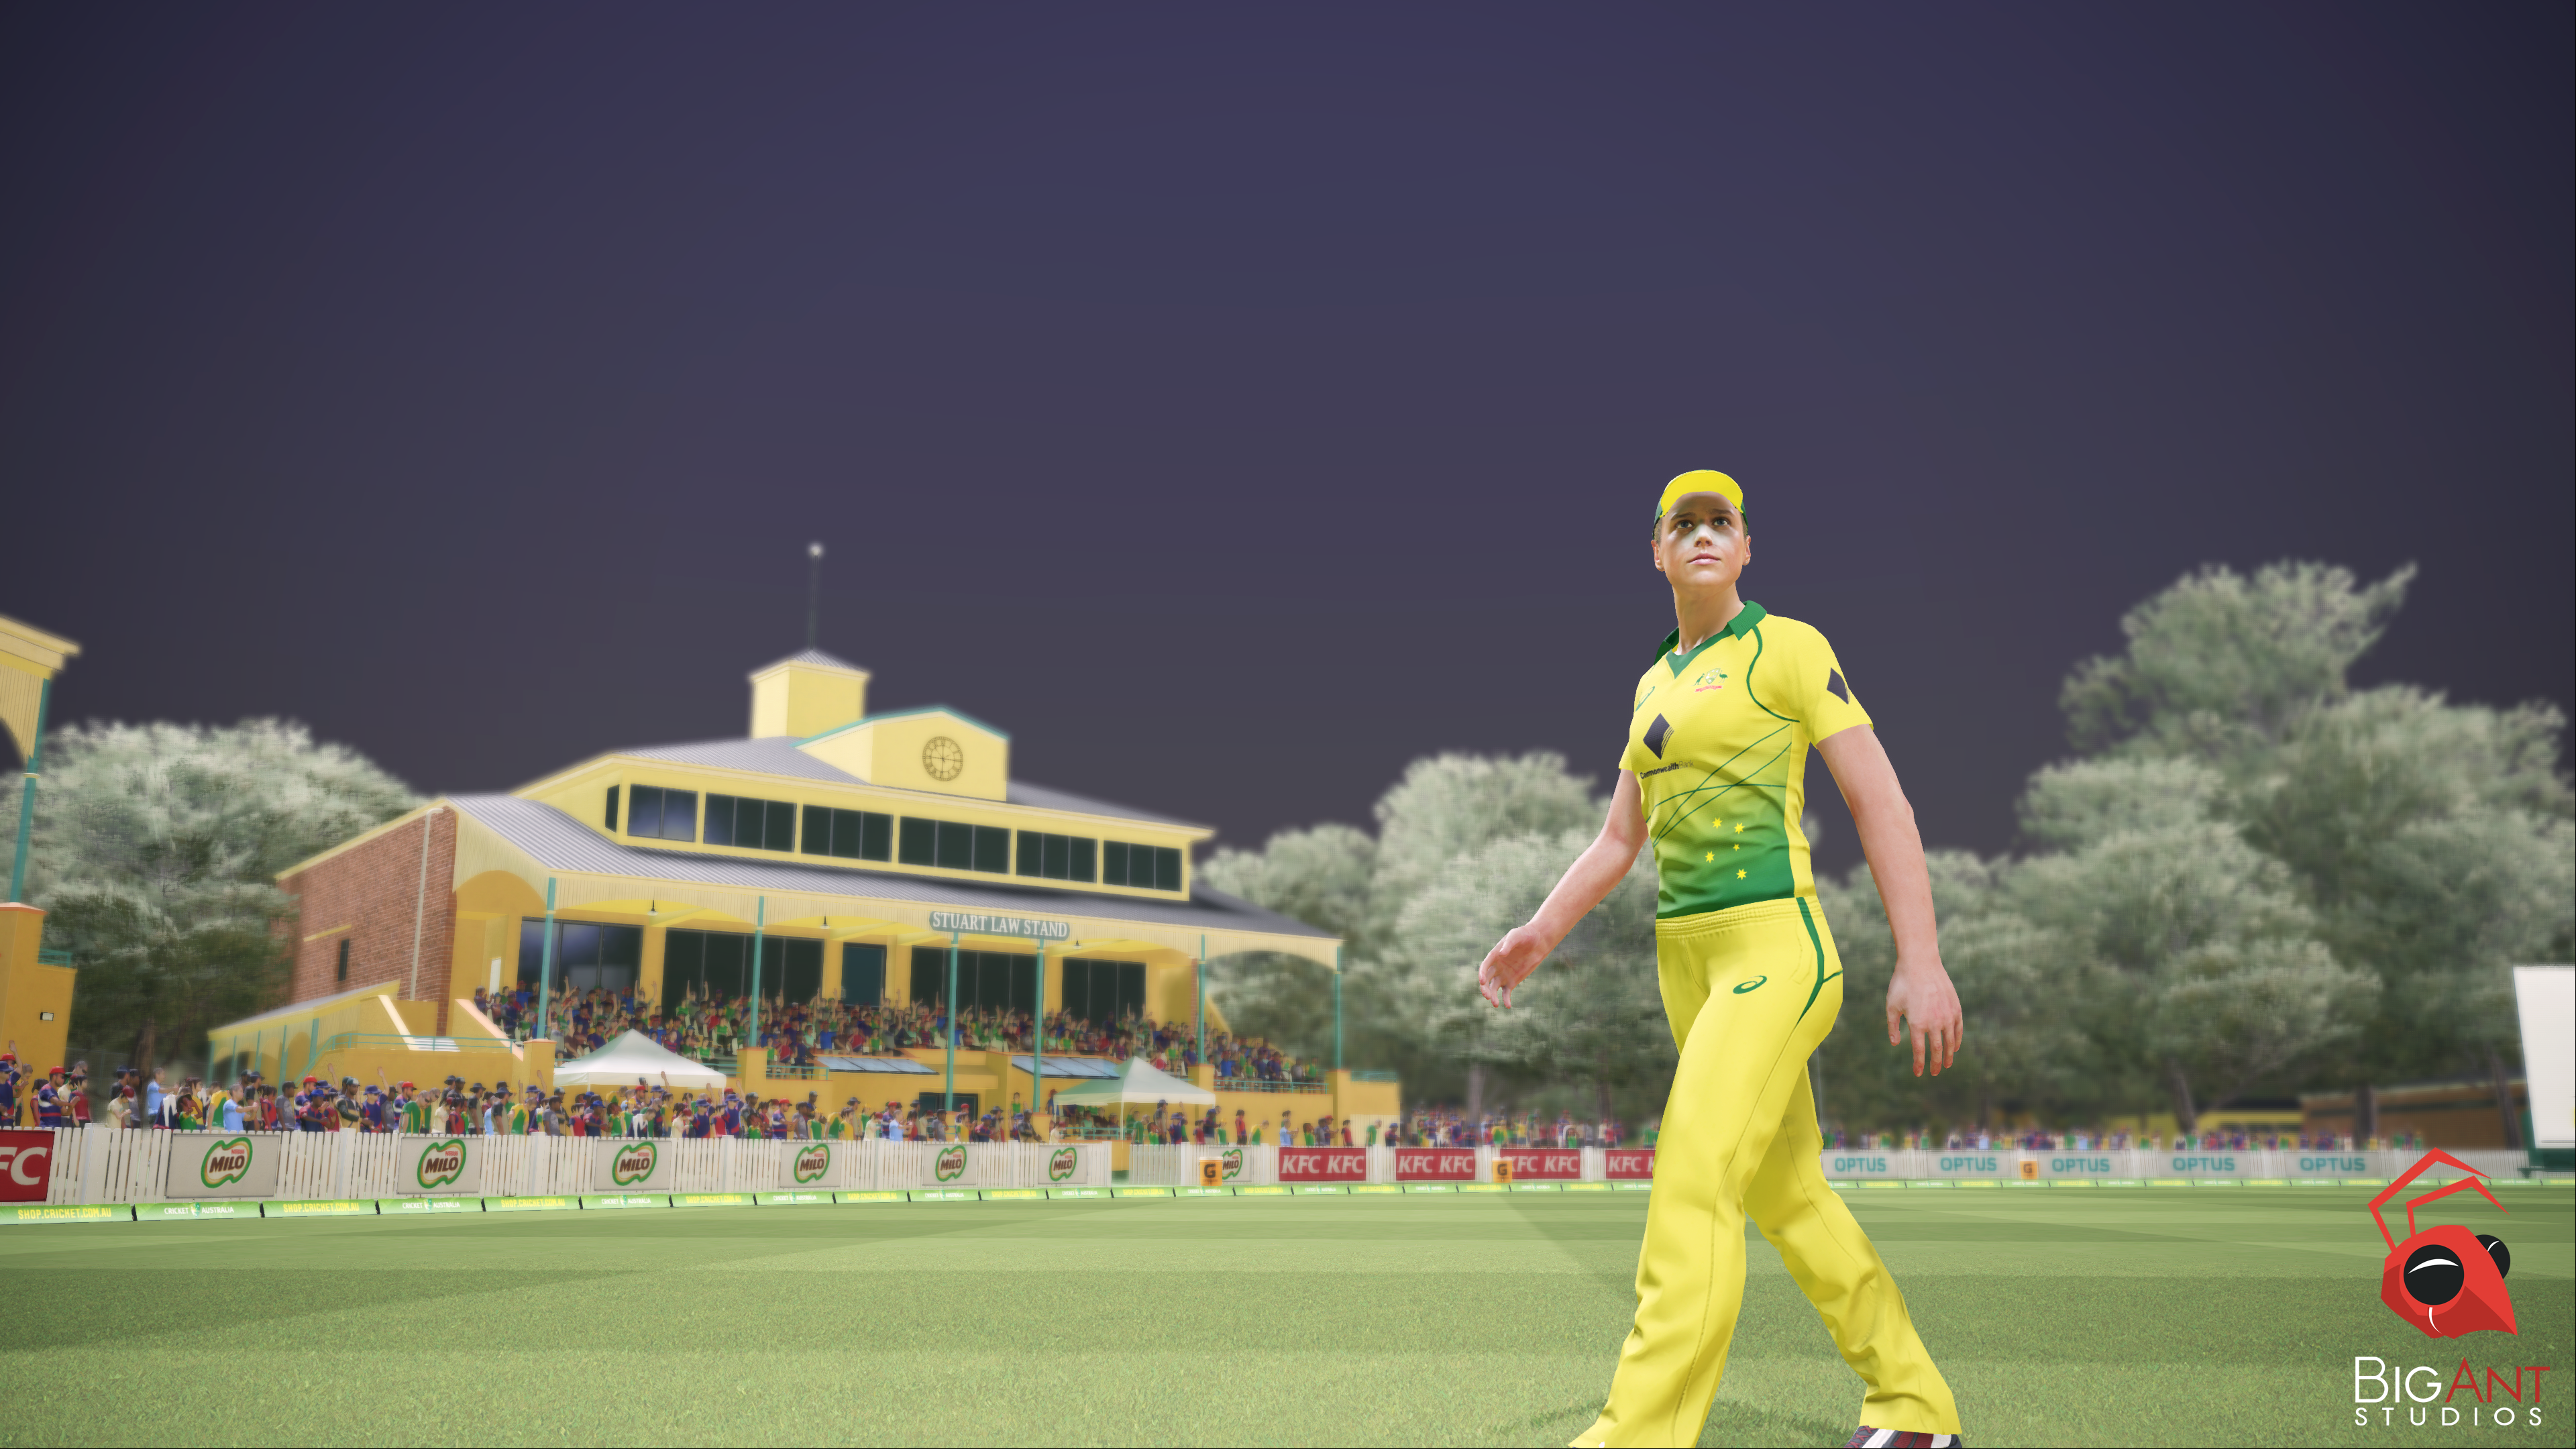 ashes cricket 2019 game